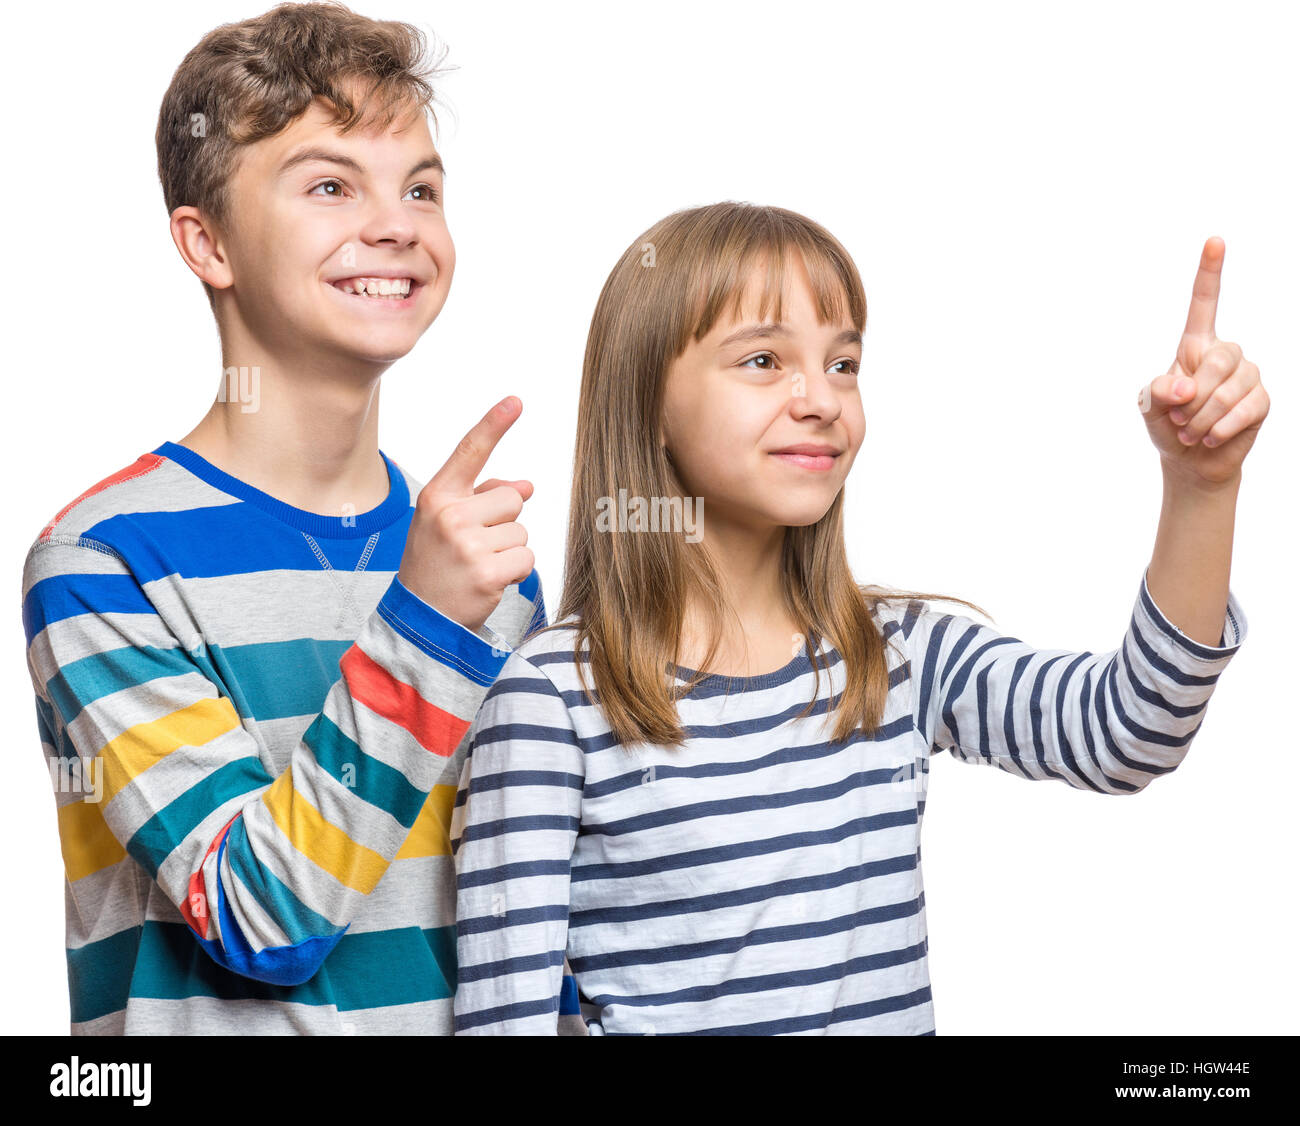 Emotional portrait of boy and girl Stock Photo